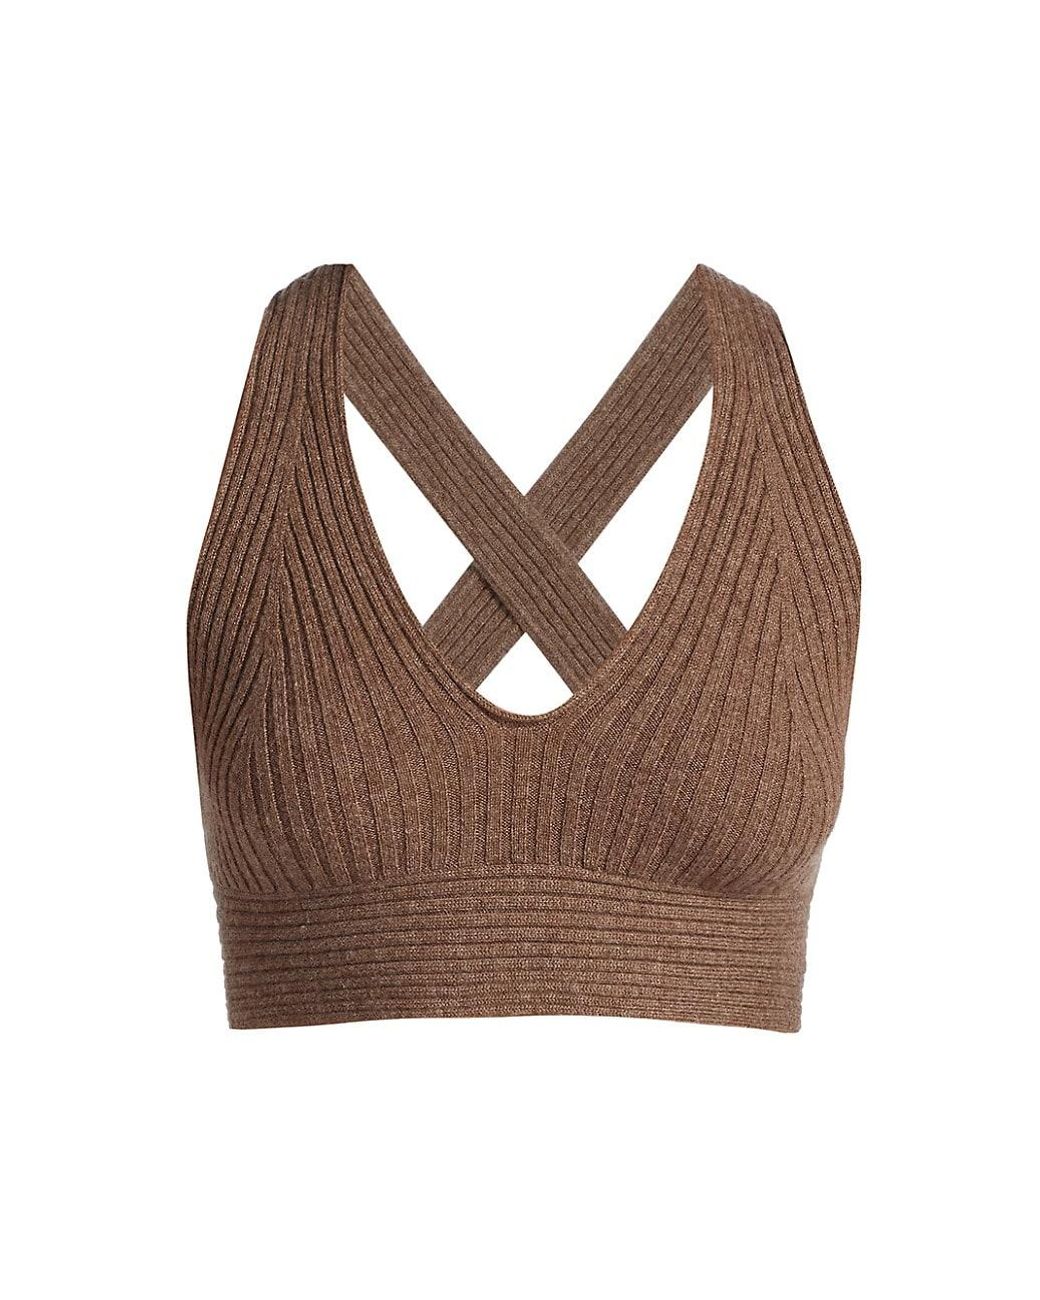 Loulou Studio Plunging Cashmere Knit Bra Top in Brown - Lyst